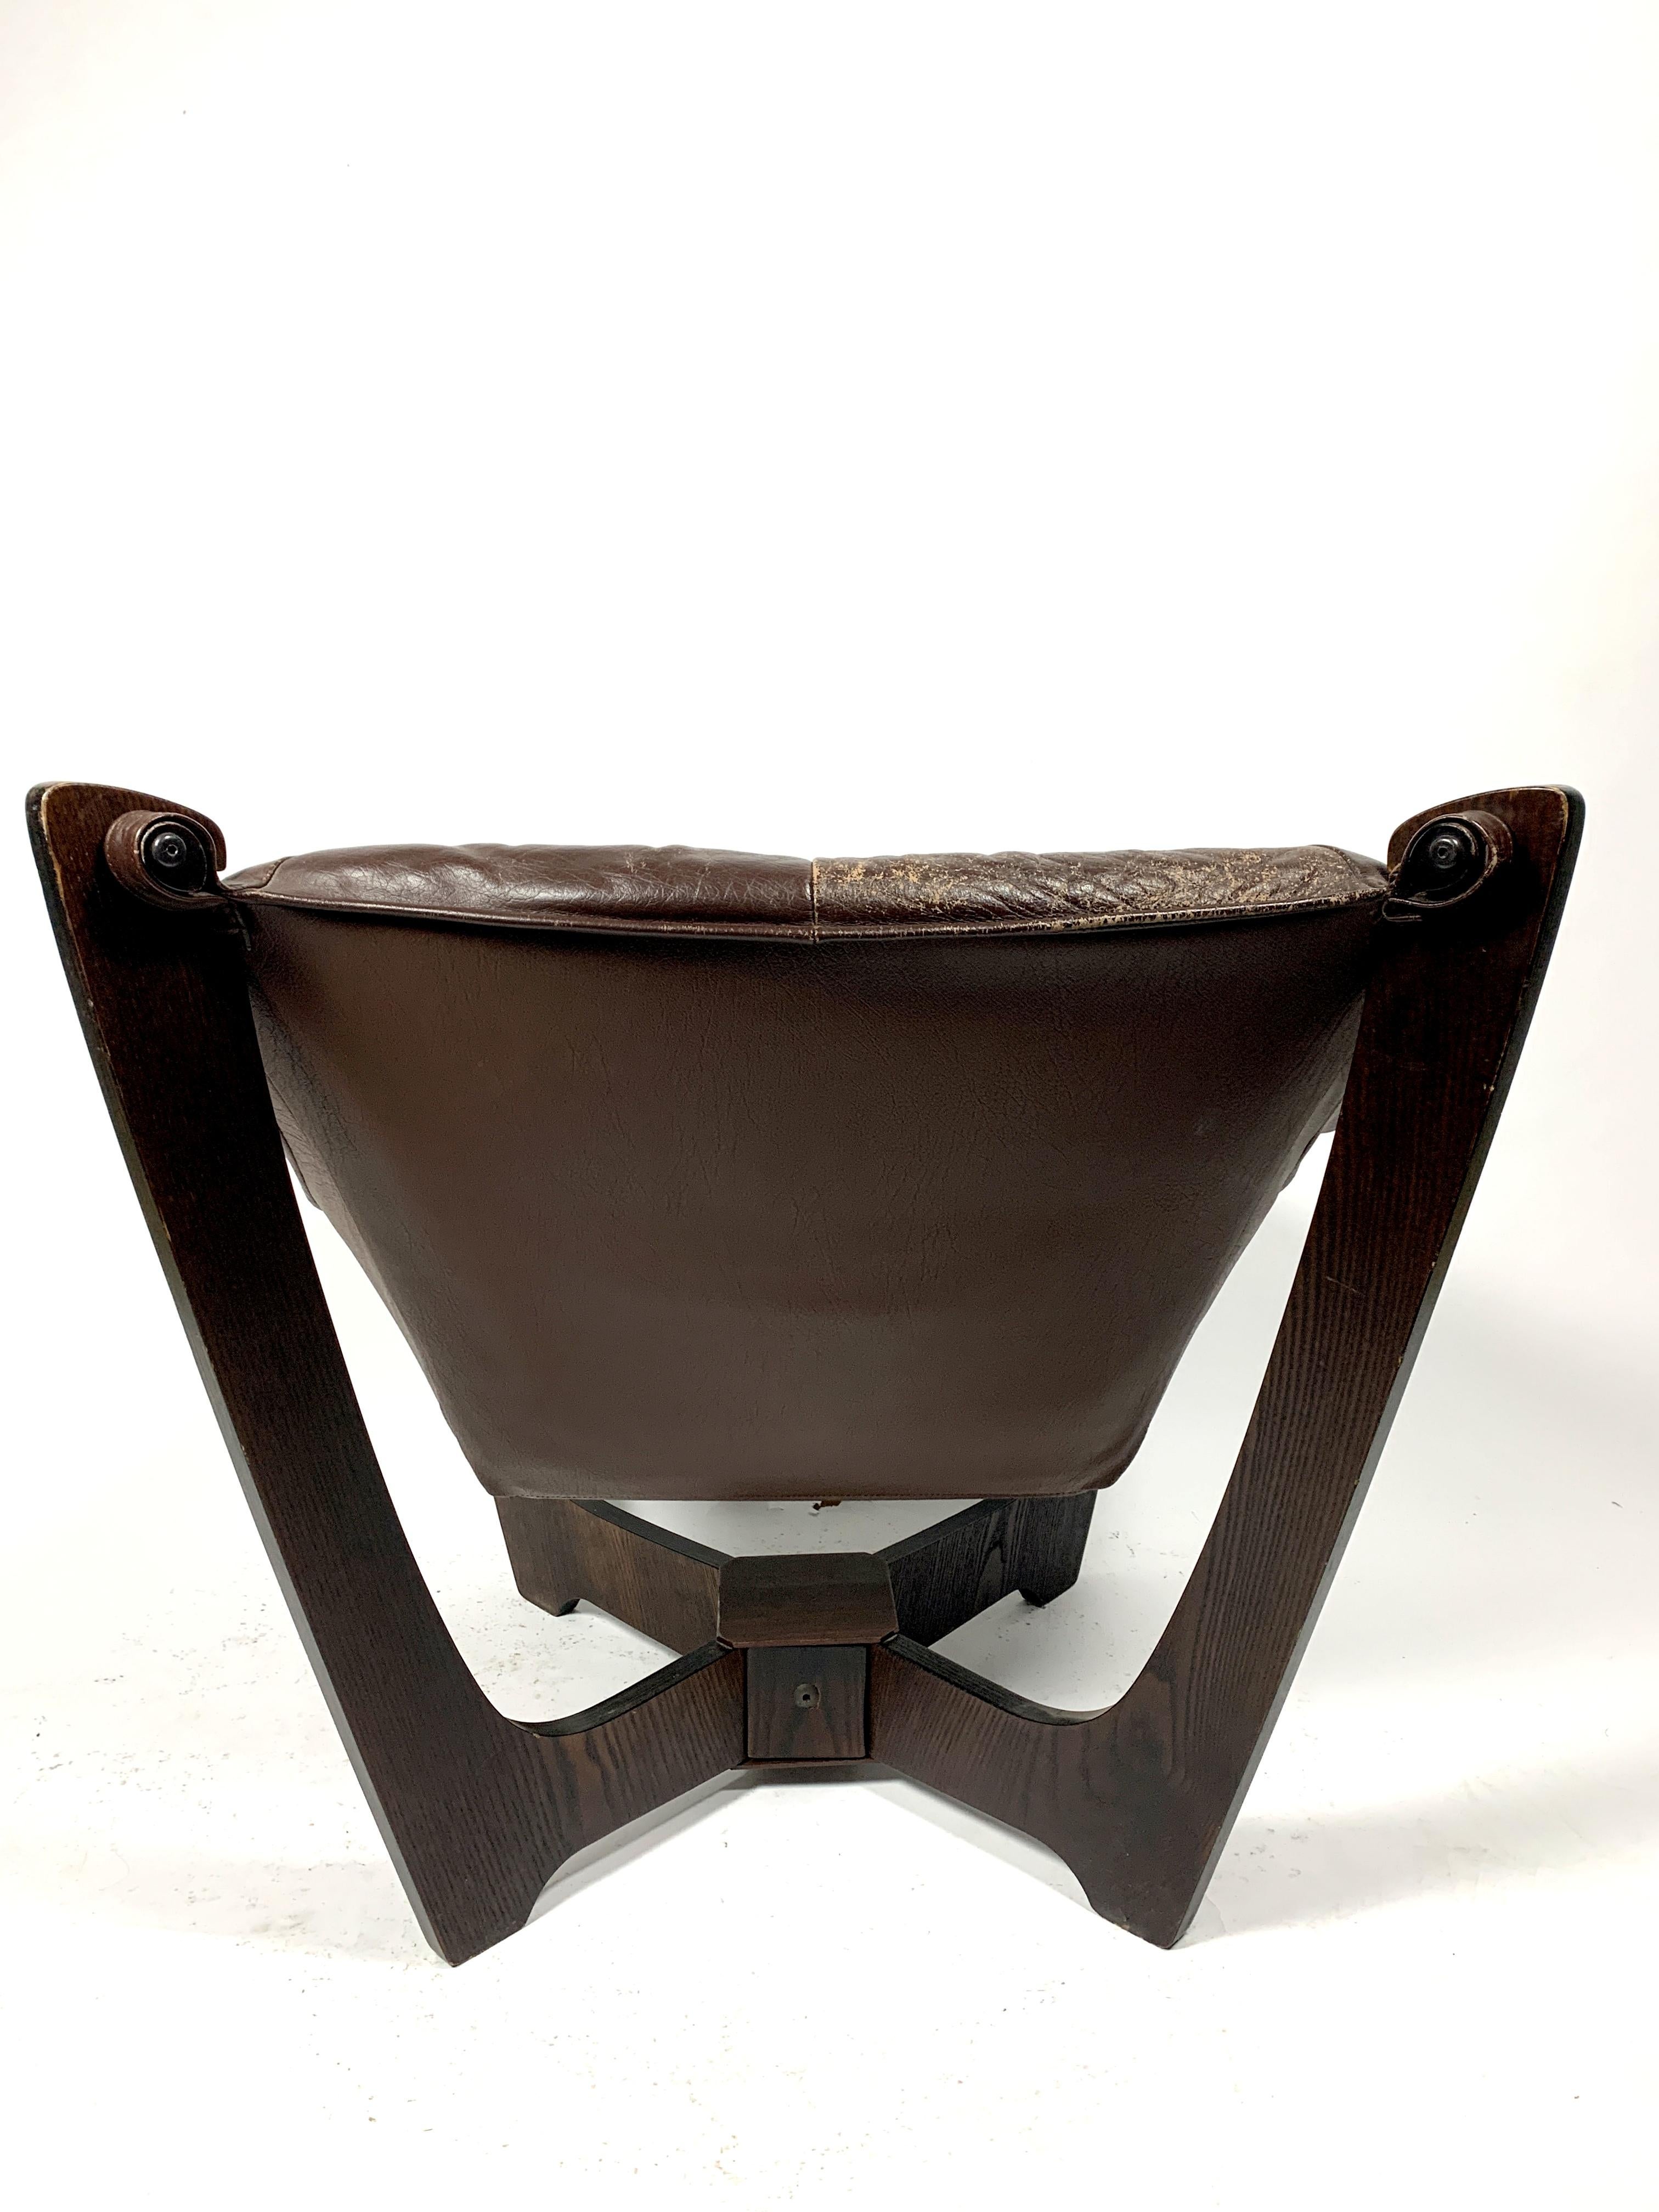 Vintage Luna Lounge Leather Chair by Odd Knutsen For Sale 2